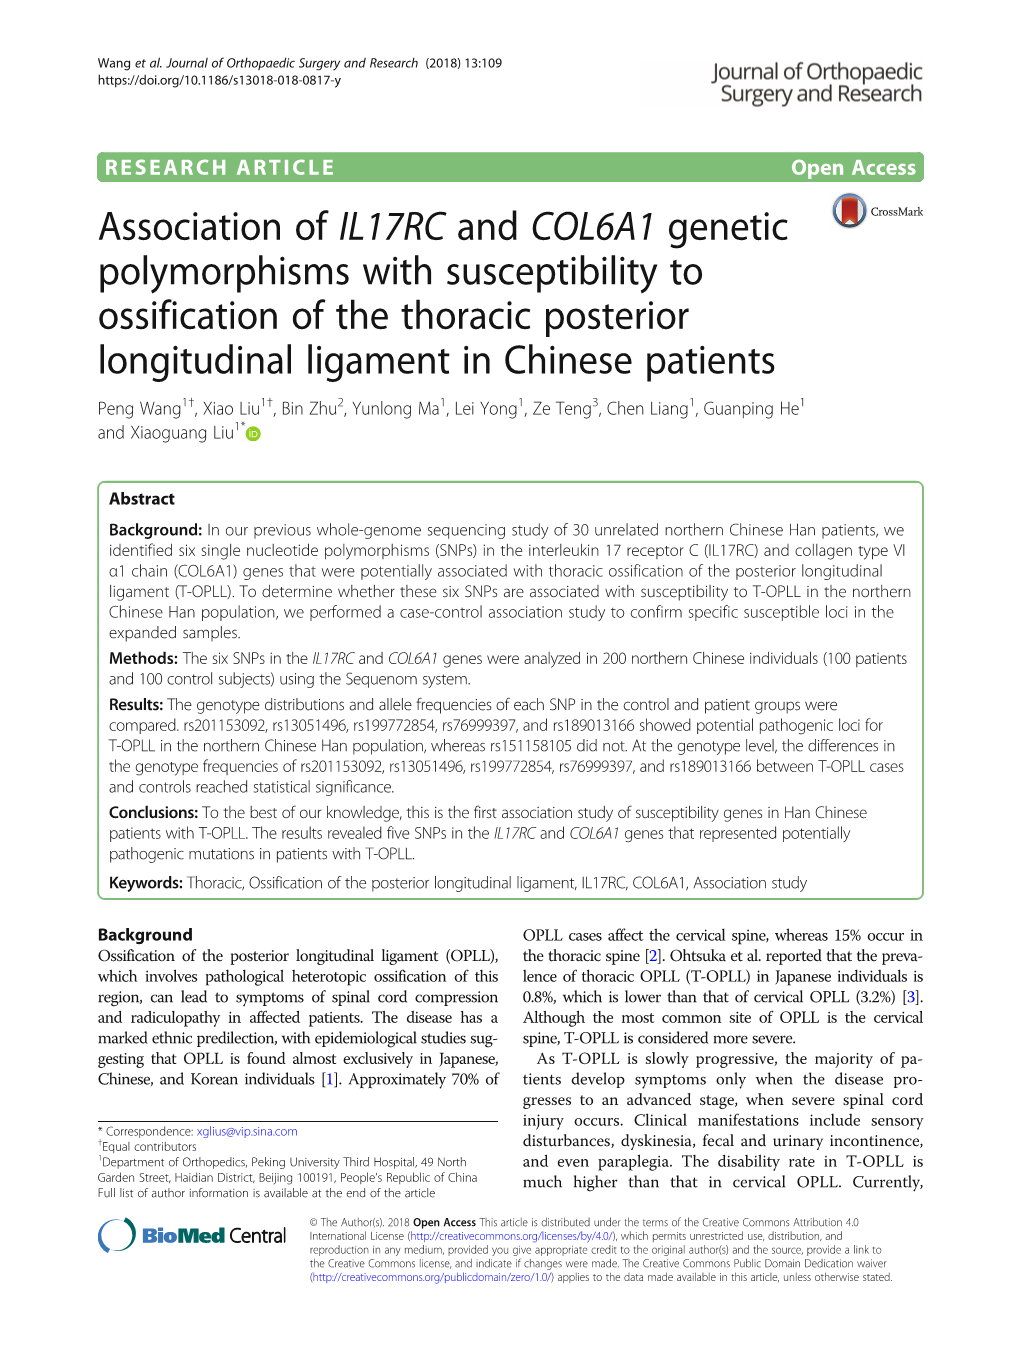 Association of IL17RC and COL6A1 Genetic Polymorphisms With